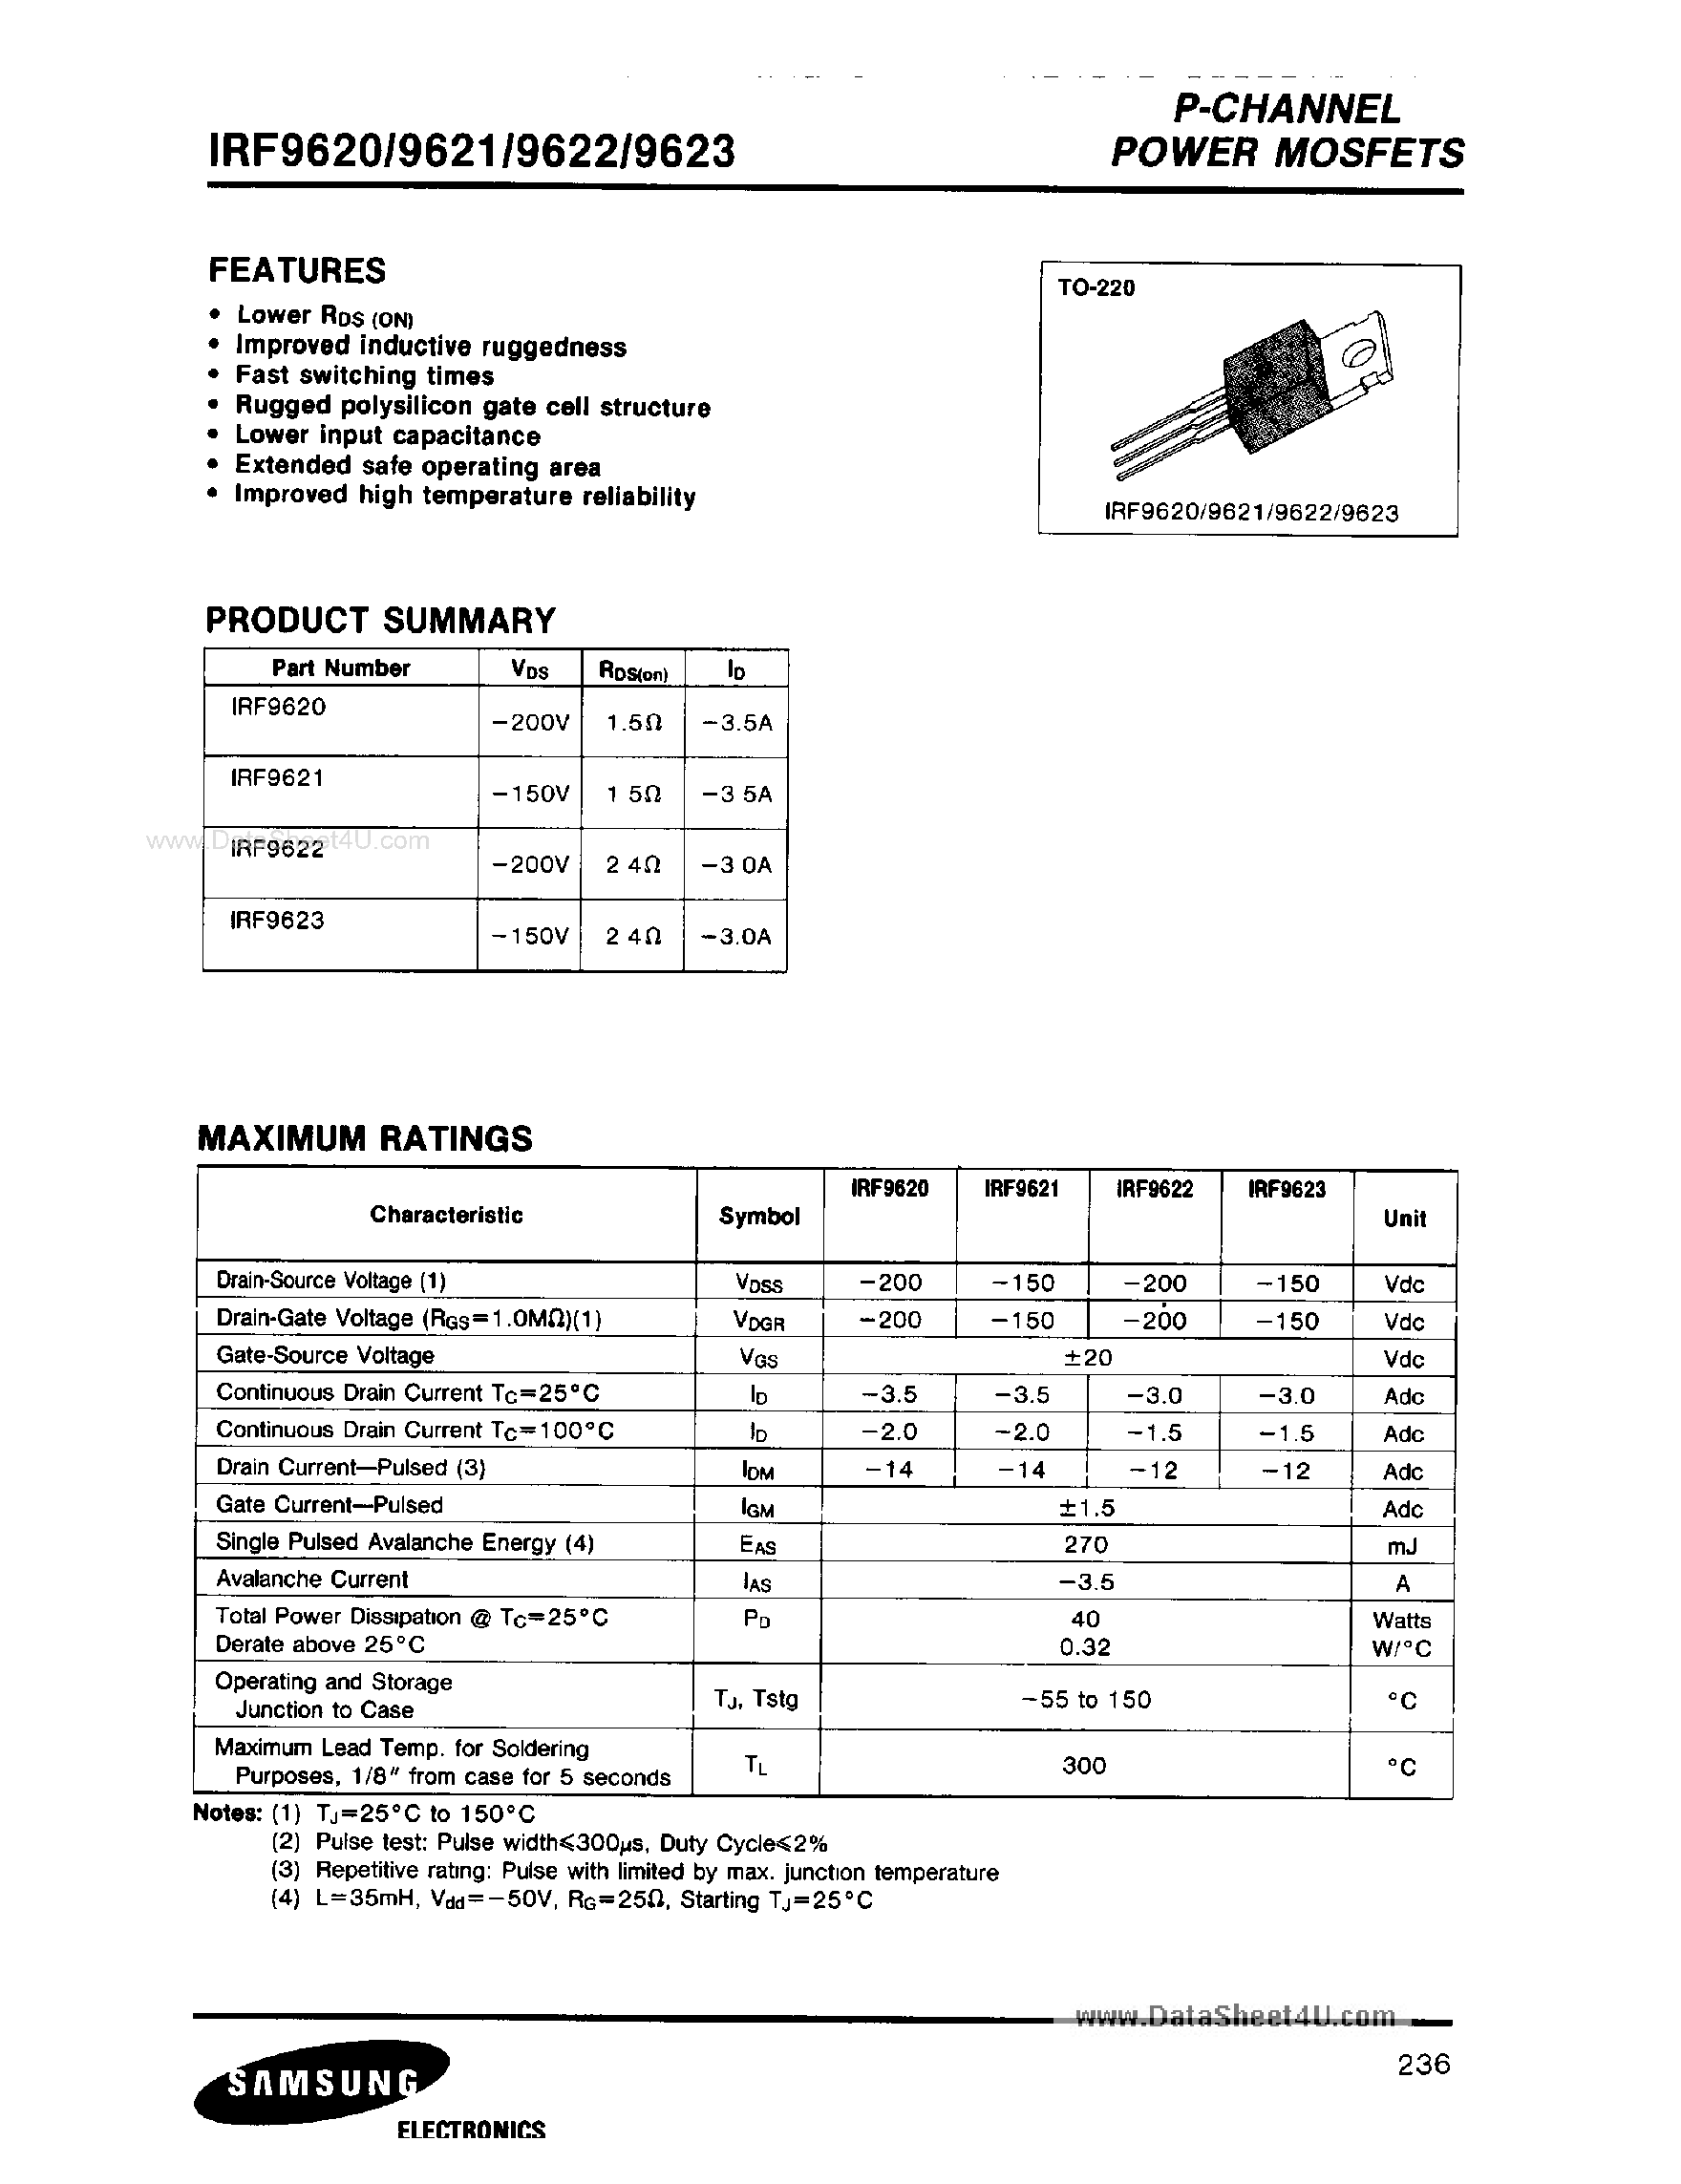 Даташит IRF9620 - (IRF9620 - IRF9623) P-Channel Power MOSFETS страница 1